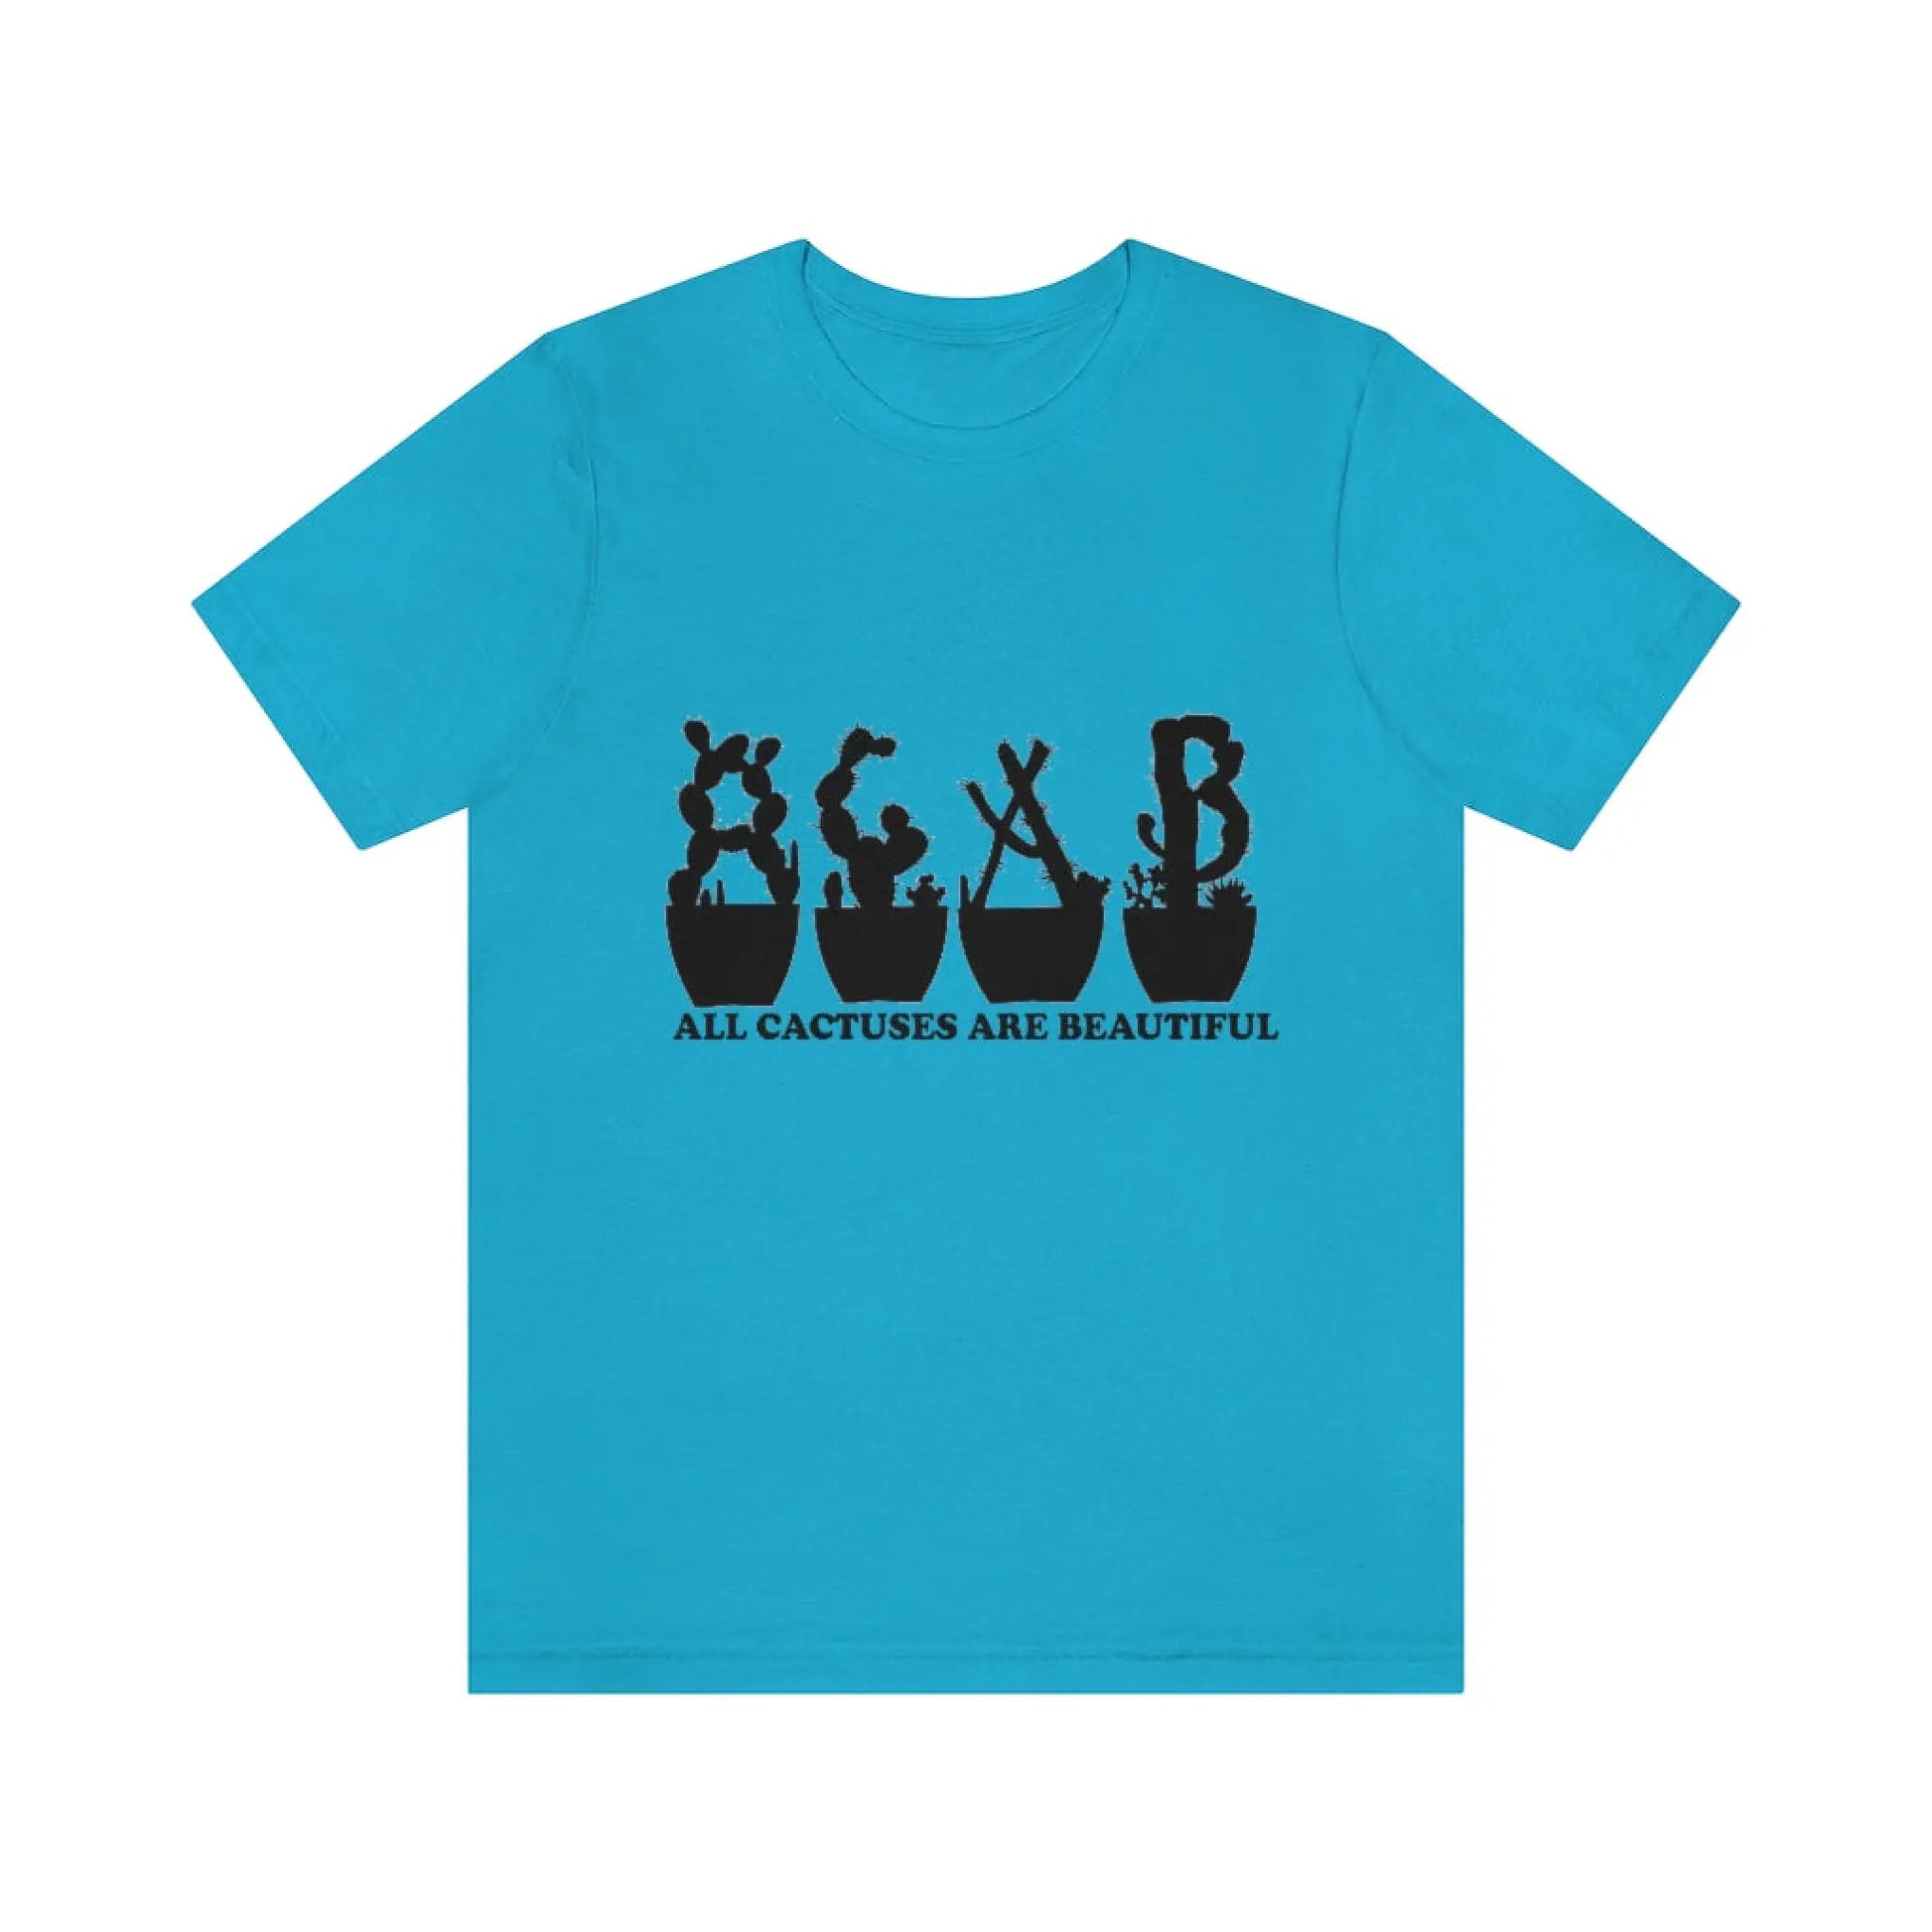 Shirts - All Cactuses Are Beautiful - Turquoise / S -